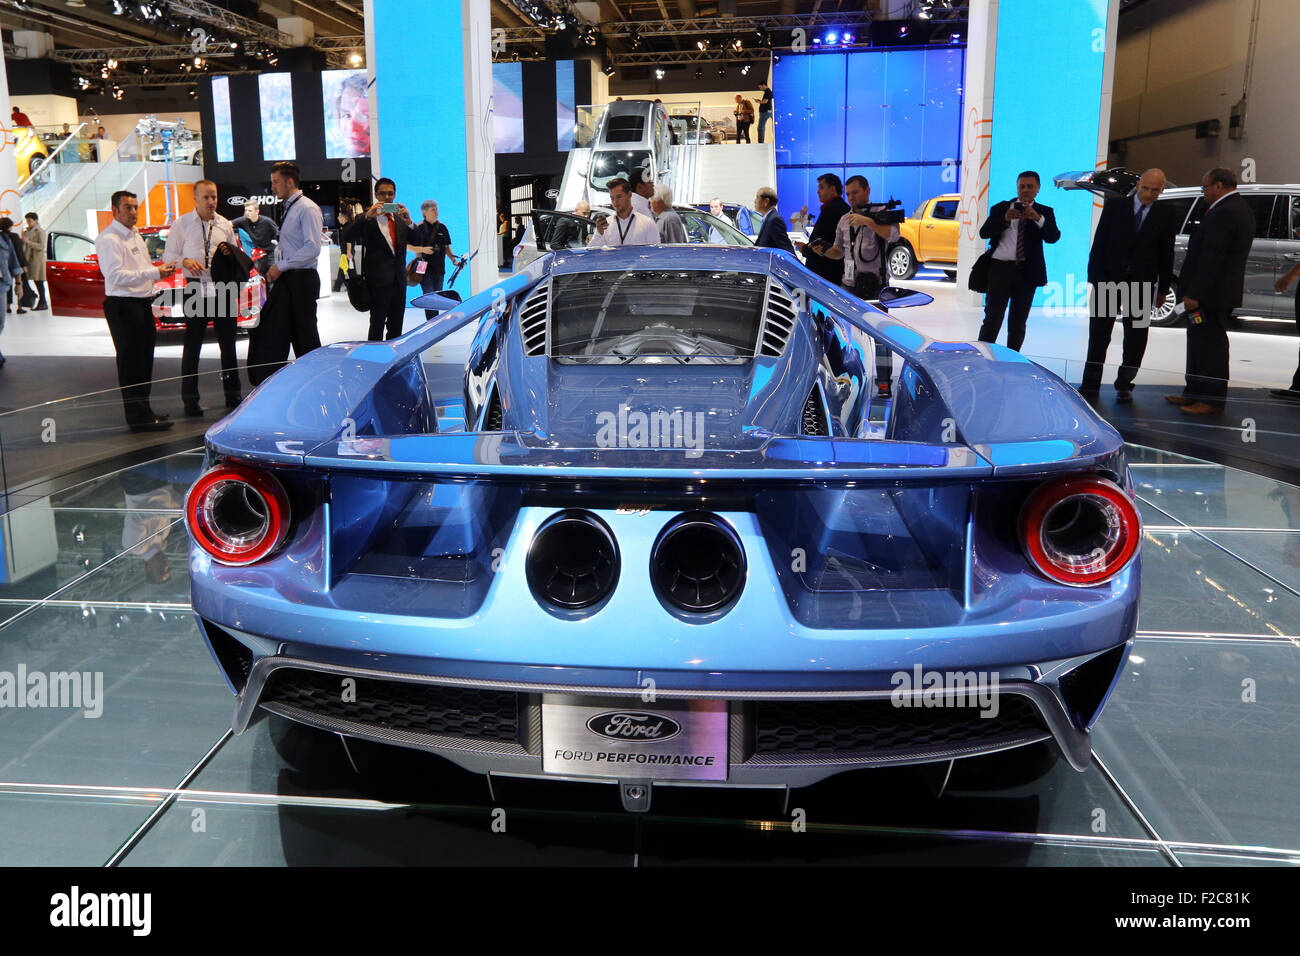 Frankfurt/M, 16.09.2015 - FORD GT concept car at the Ford stand at the 66th International Motor Show IAA 2015 (Internationale Automobil Ausstellung, IAA) in Frankfurt/Main, Germany Stock Photo